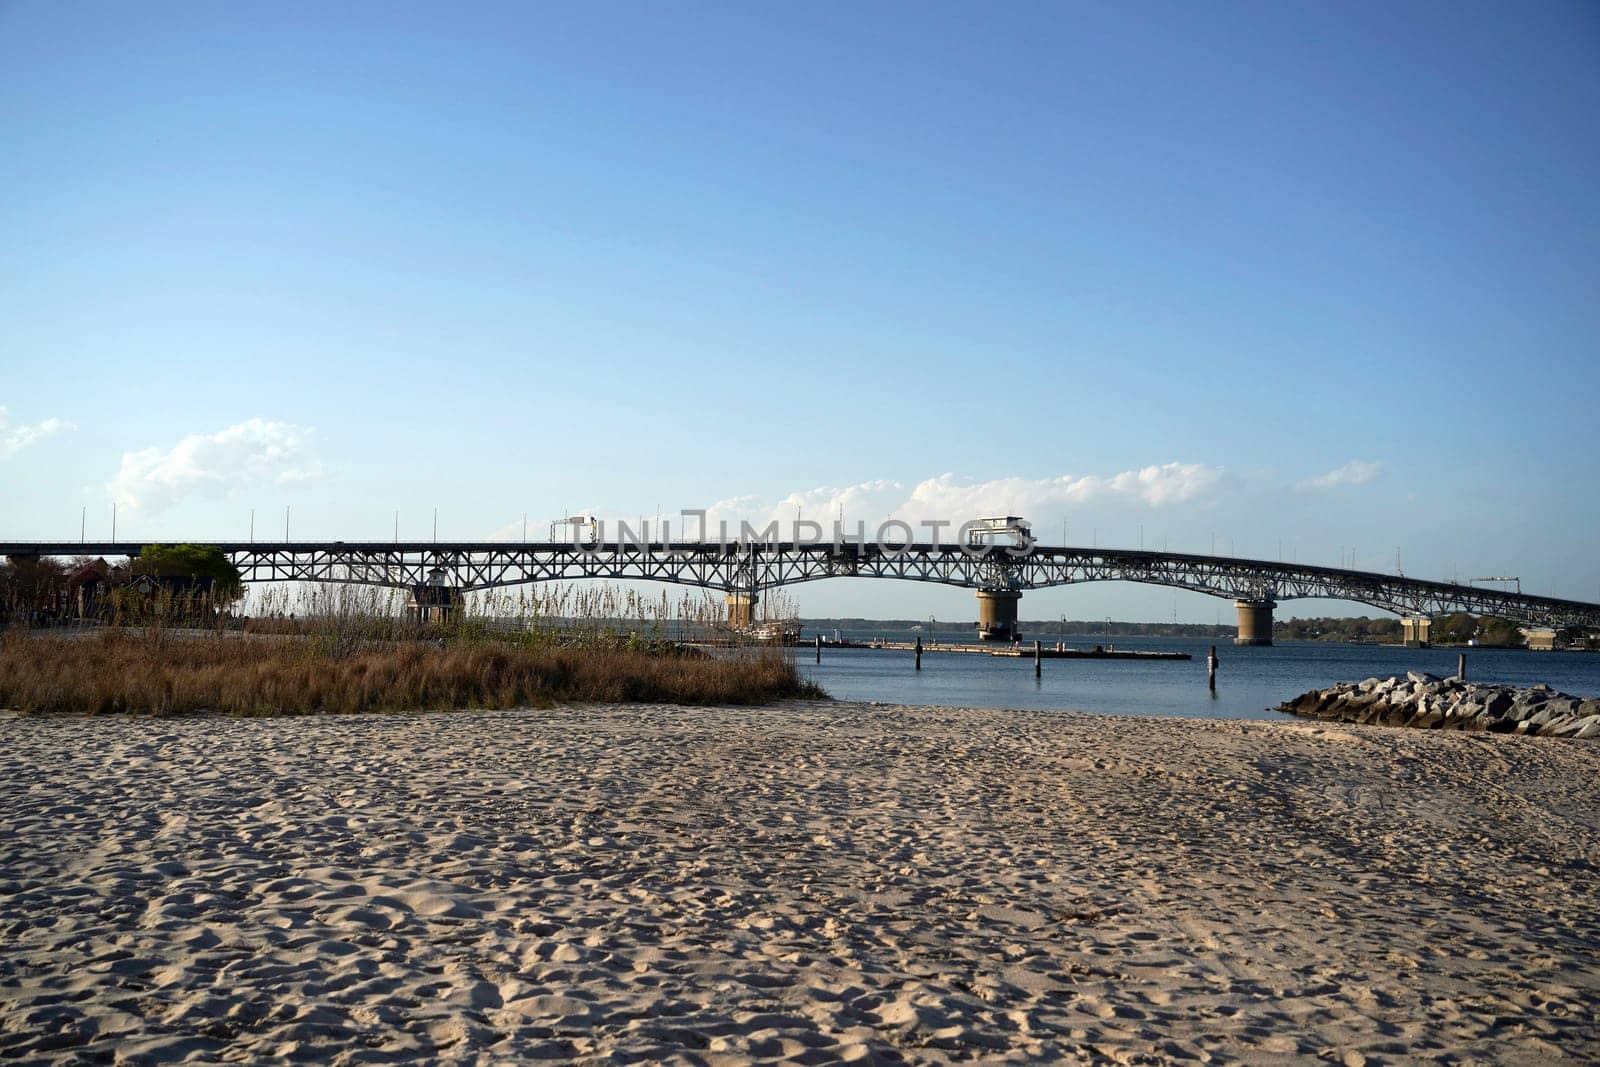 The York river and beach in Yorktown Virginia USA overlooking the Coleman Bridge and the Chesapeake Bay